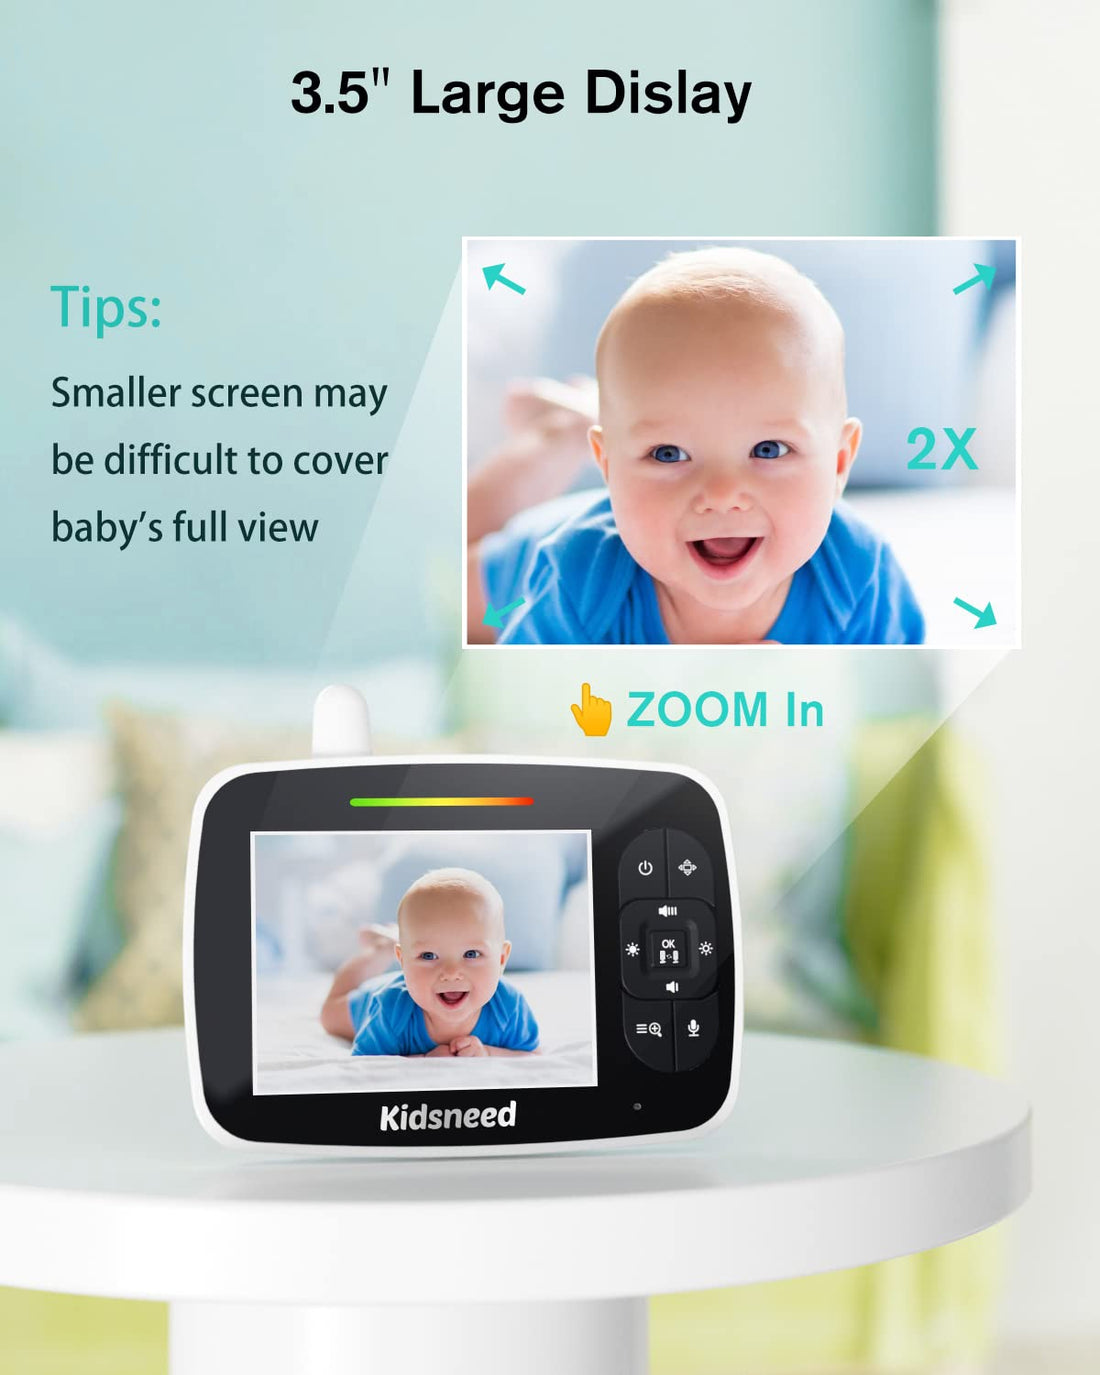 Baby Monitor, 3.5" Screen Video Baby Monitor with Camera and Audio, 2 Zoom in, Night Vision, VOX Mode, Temperature Monitoring, Lullabies, 2-Way Talk, Feeding Alarm Clock